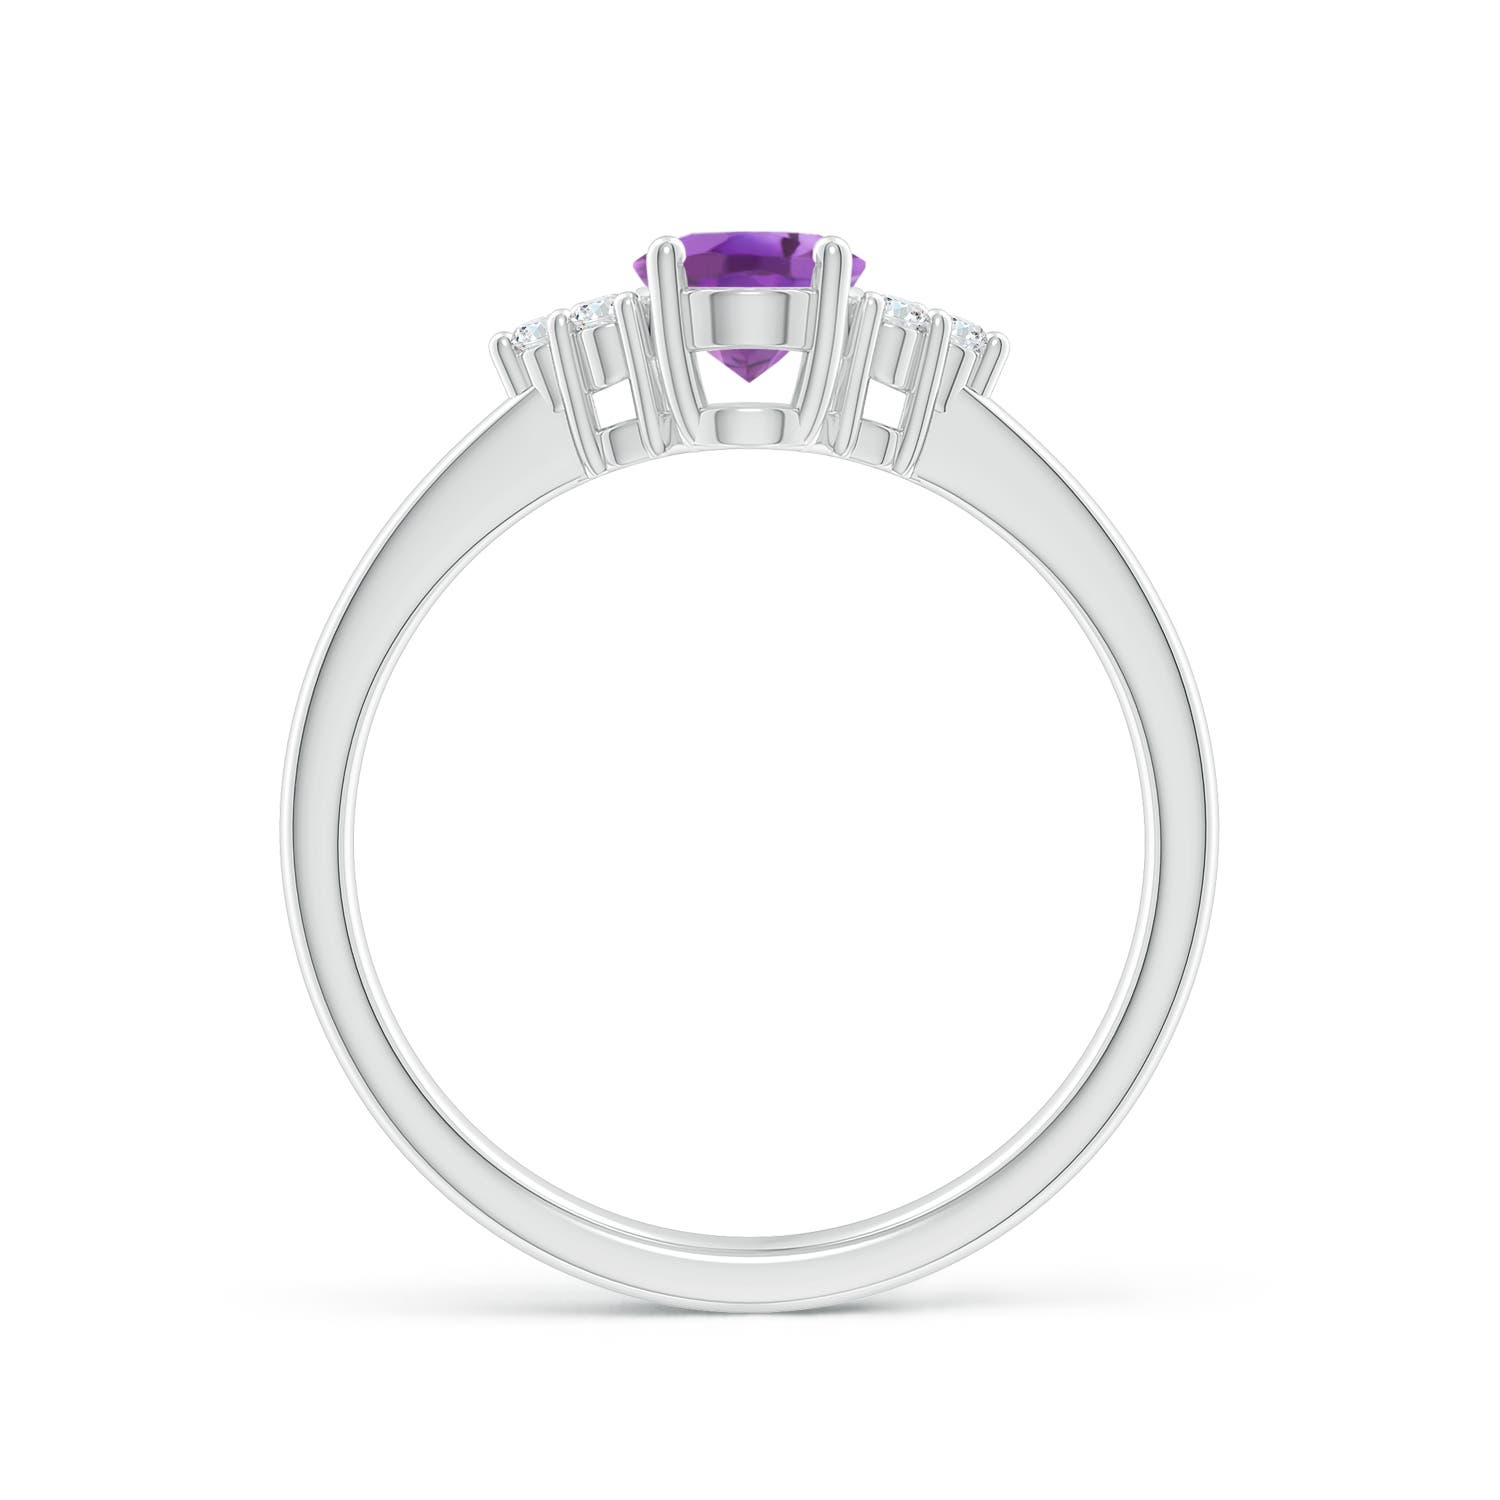 A - Amethyst / 0.78 CT / 14 KT White Gold